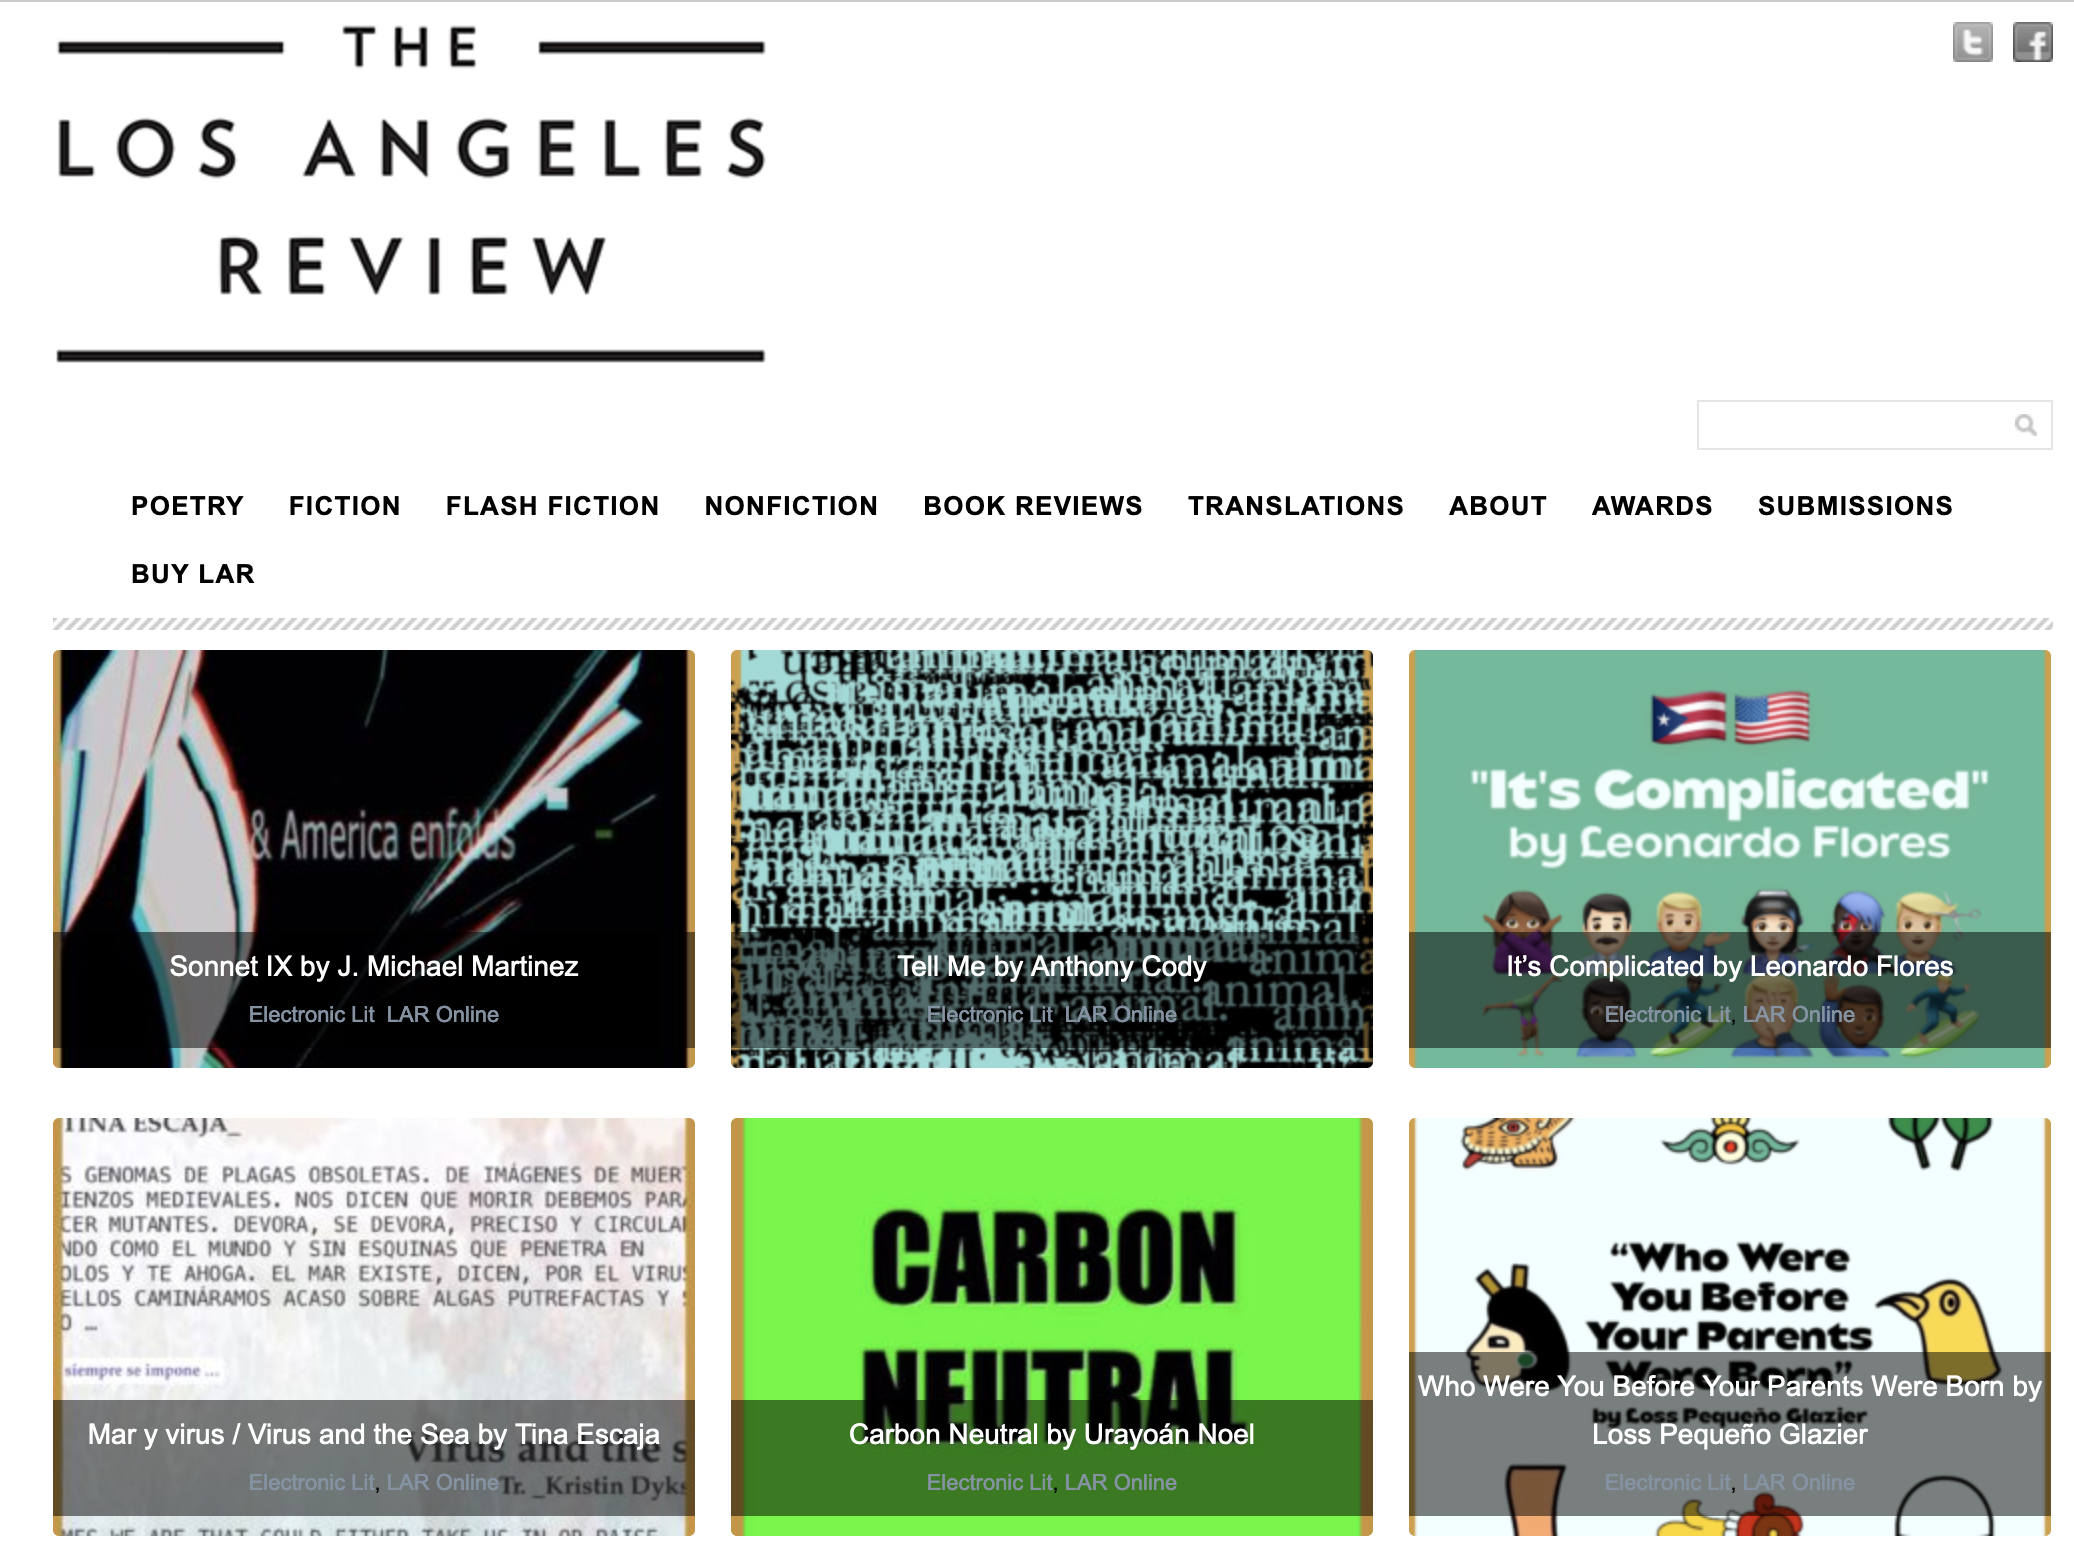 screenshot of this webpage: https://losangelesreview.org/category/poetry/electronic-lit/